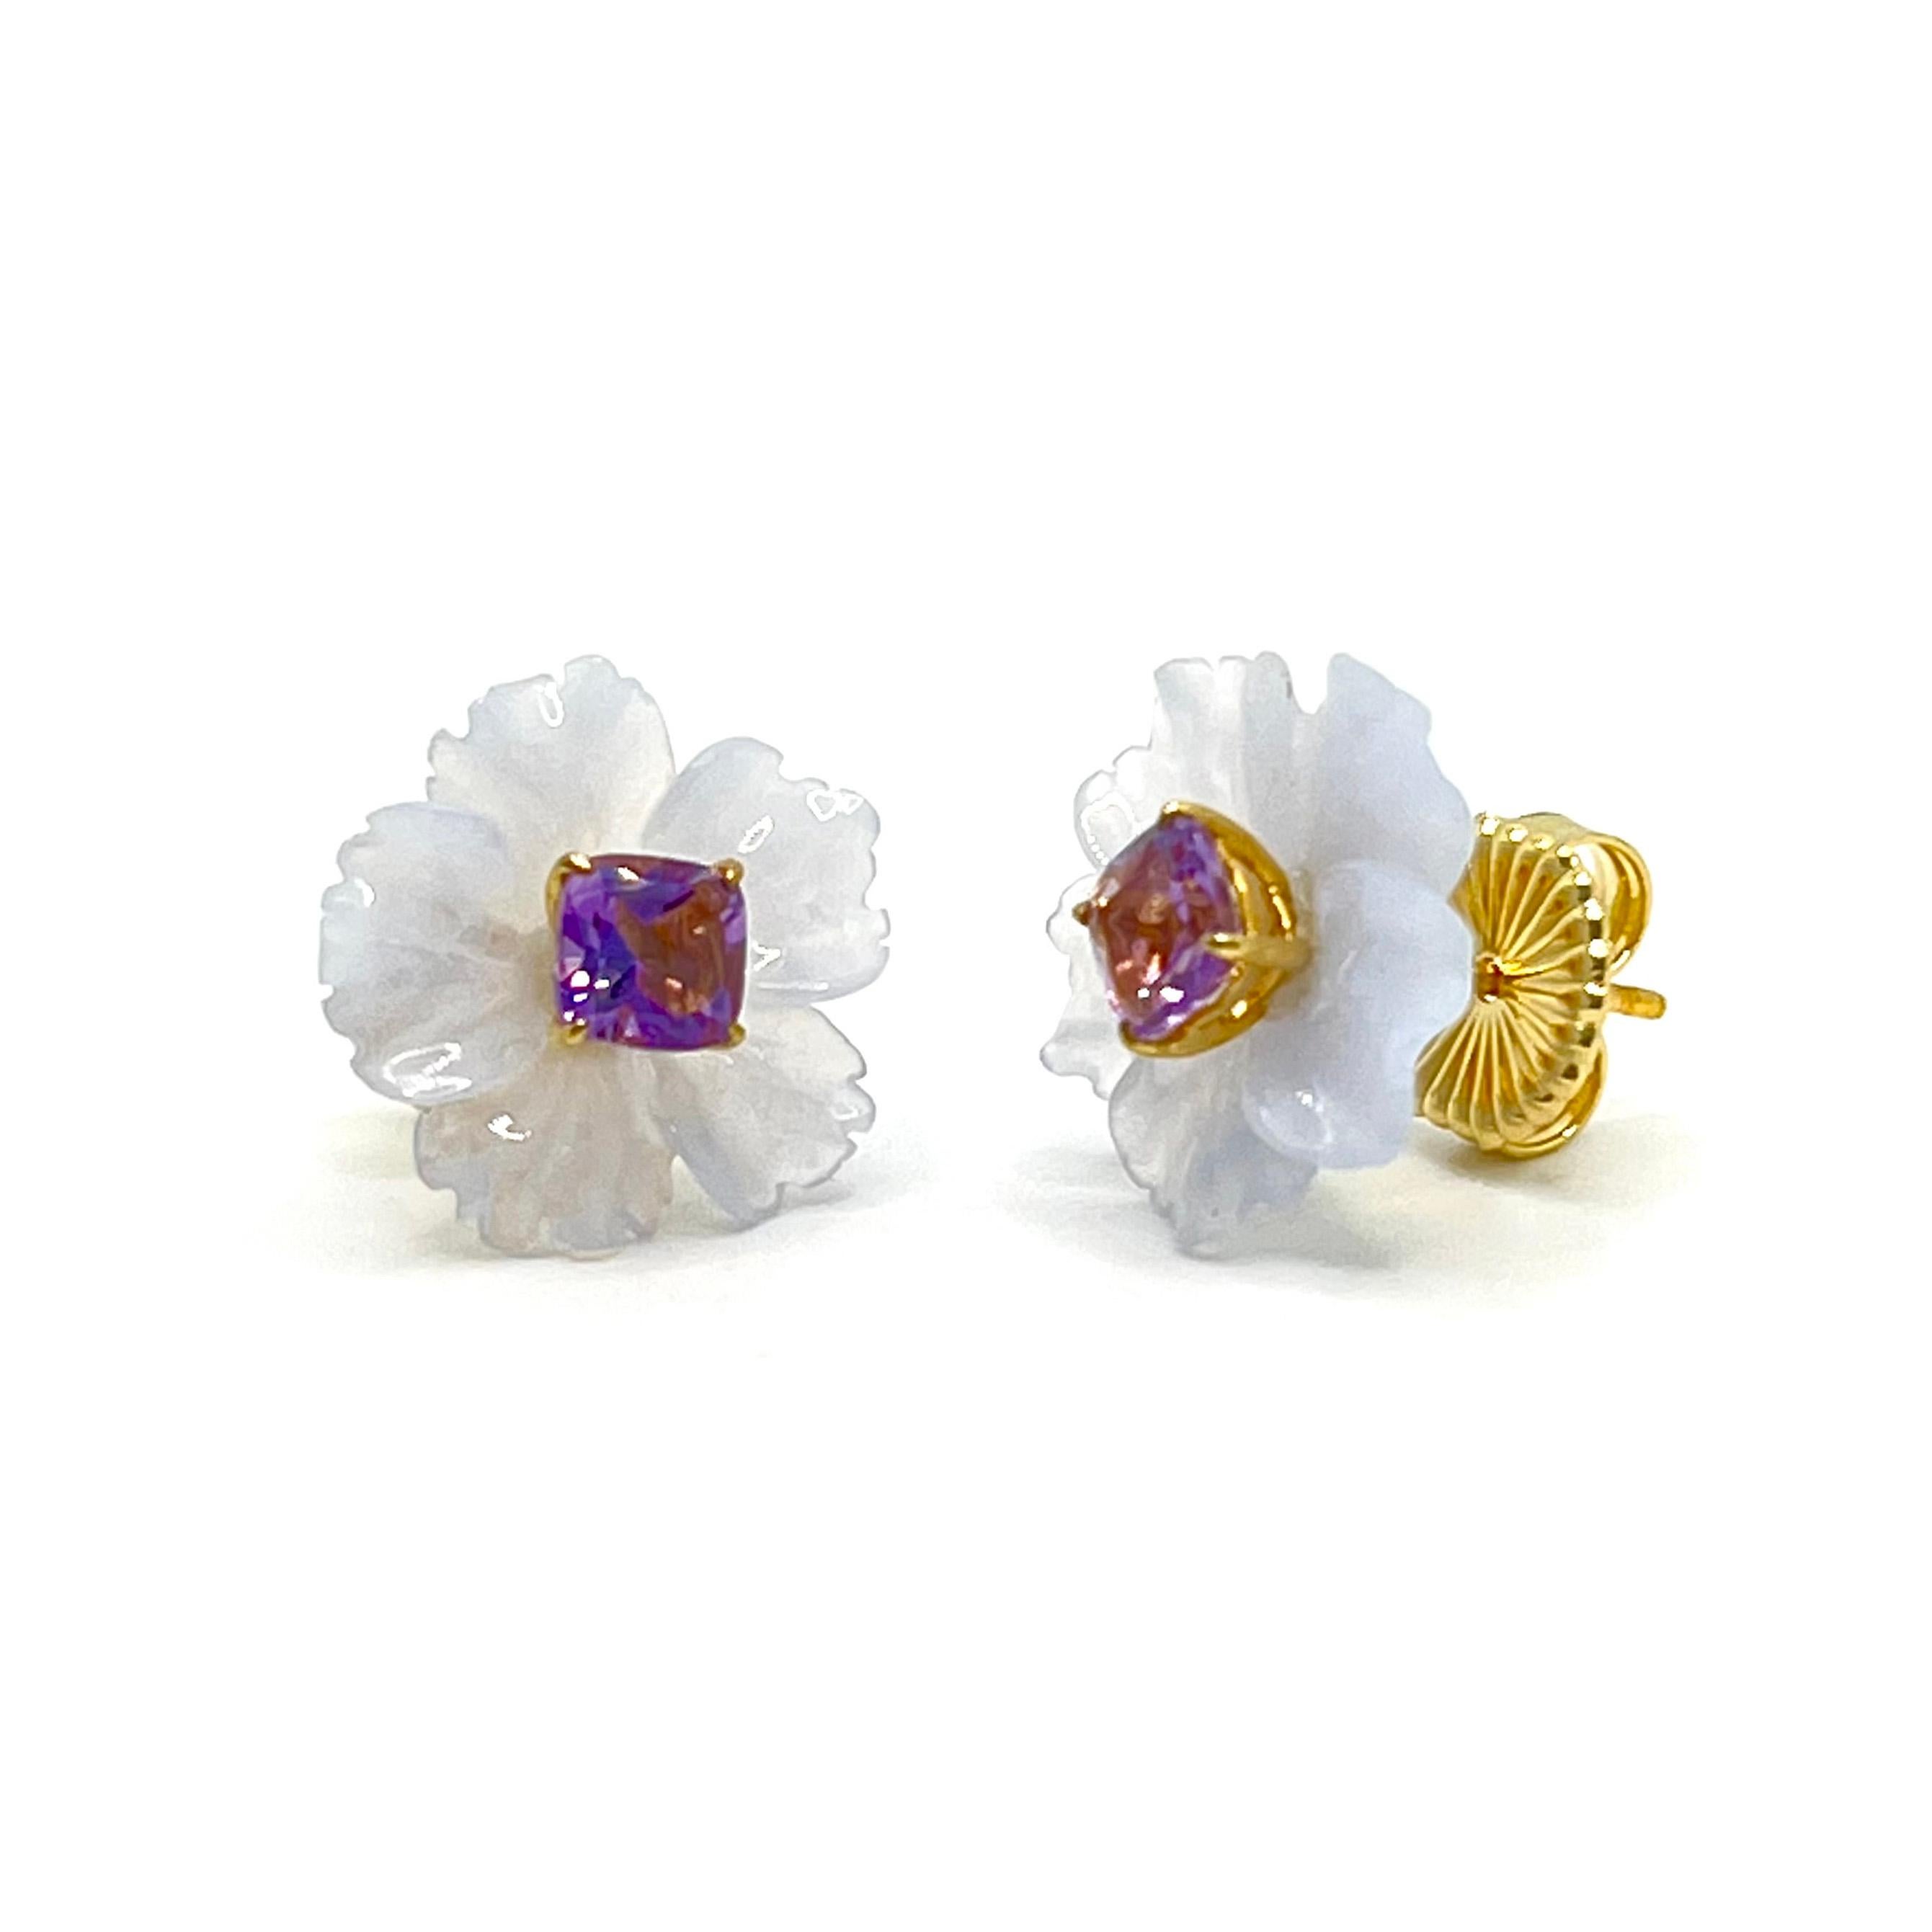 Bijoux Num's 15mm Carved Chalcedony Flower and Cushion Amethyst Vermeil Earrings

This gorgeous pair of earrings features 15mm periwinkle purplish-blue chalcedony carved into beautiful three dimension flower, adorned with cushion-cut Brazilian